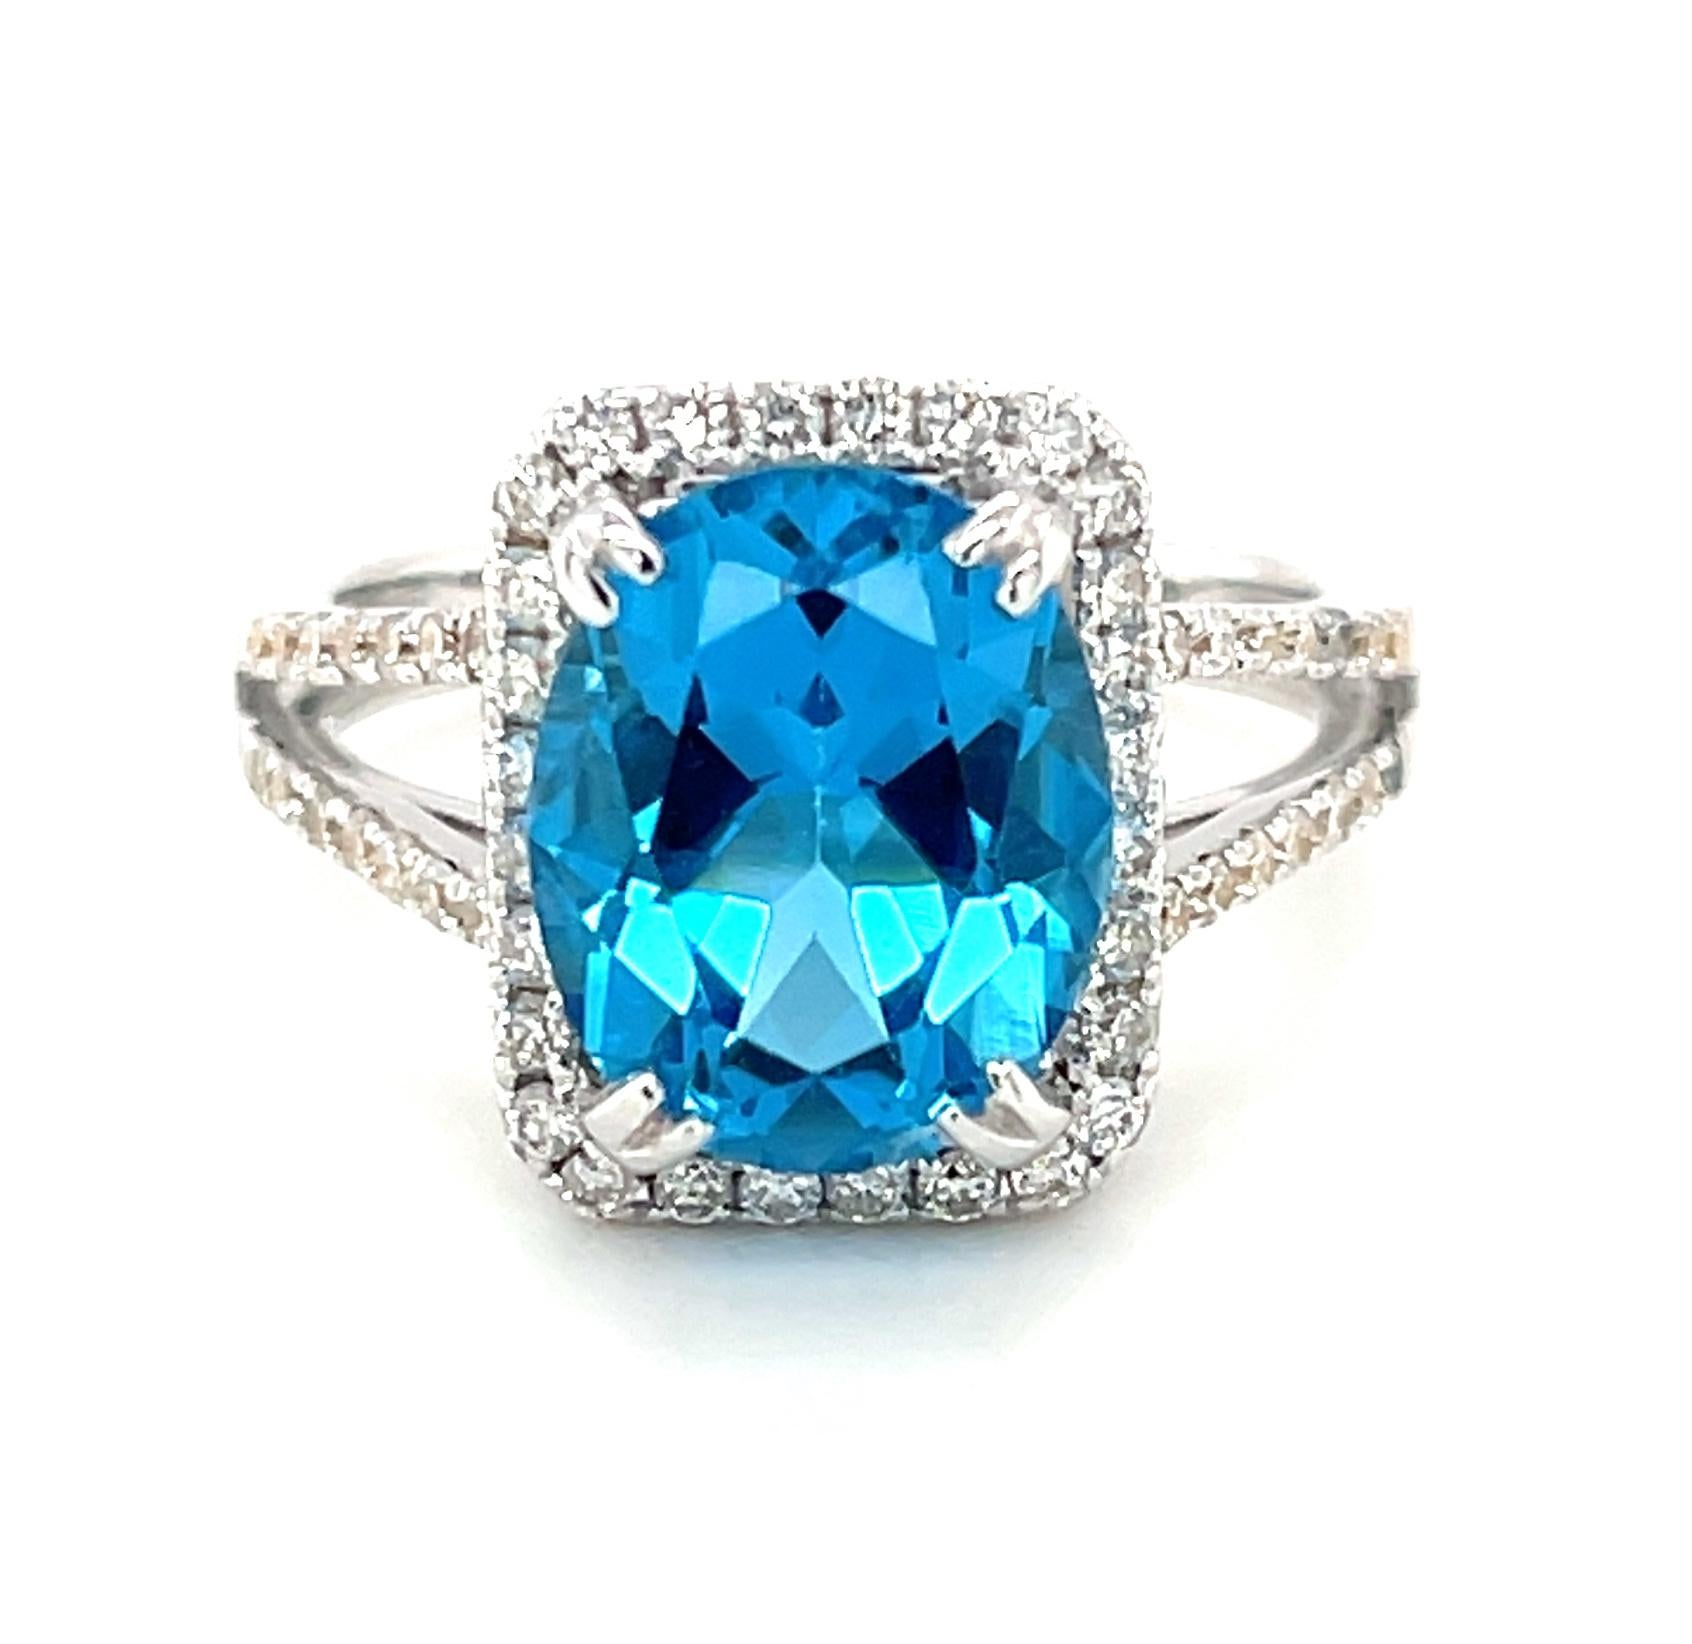 This sparkling cocktail ring features a beautiful 4.38 carat bright  blue topaz oval surrounded by a diamond halo set in 18k white gold. The rectangular halo gives the ring a modern look and shows off the beautiful shape of the center gem. Brilliant